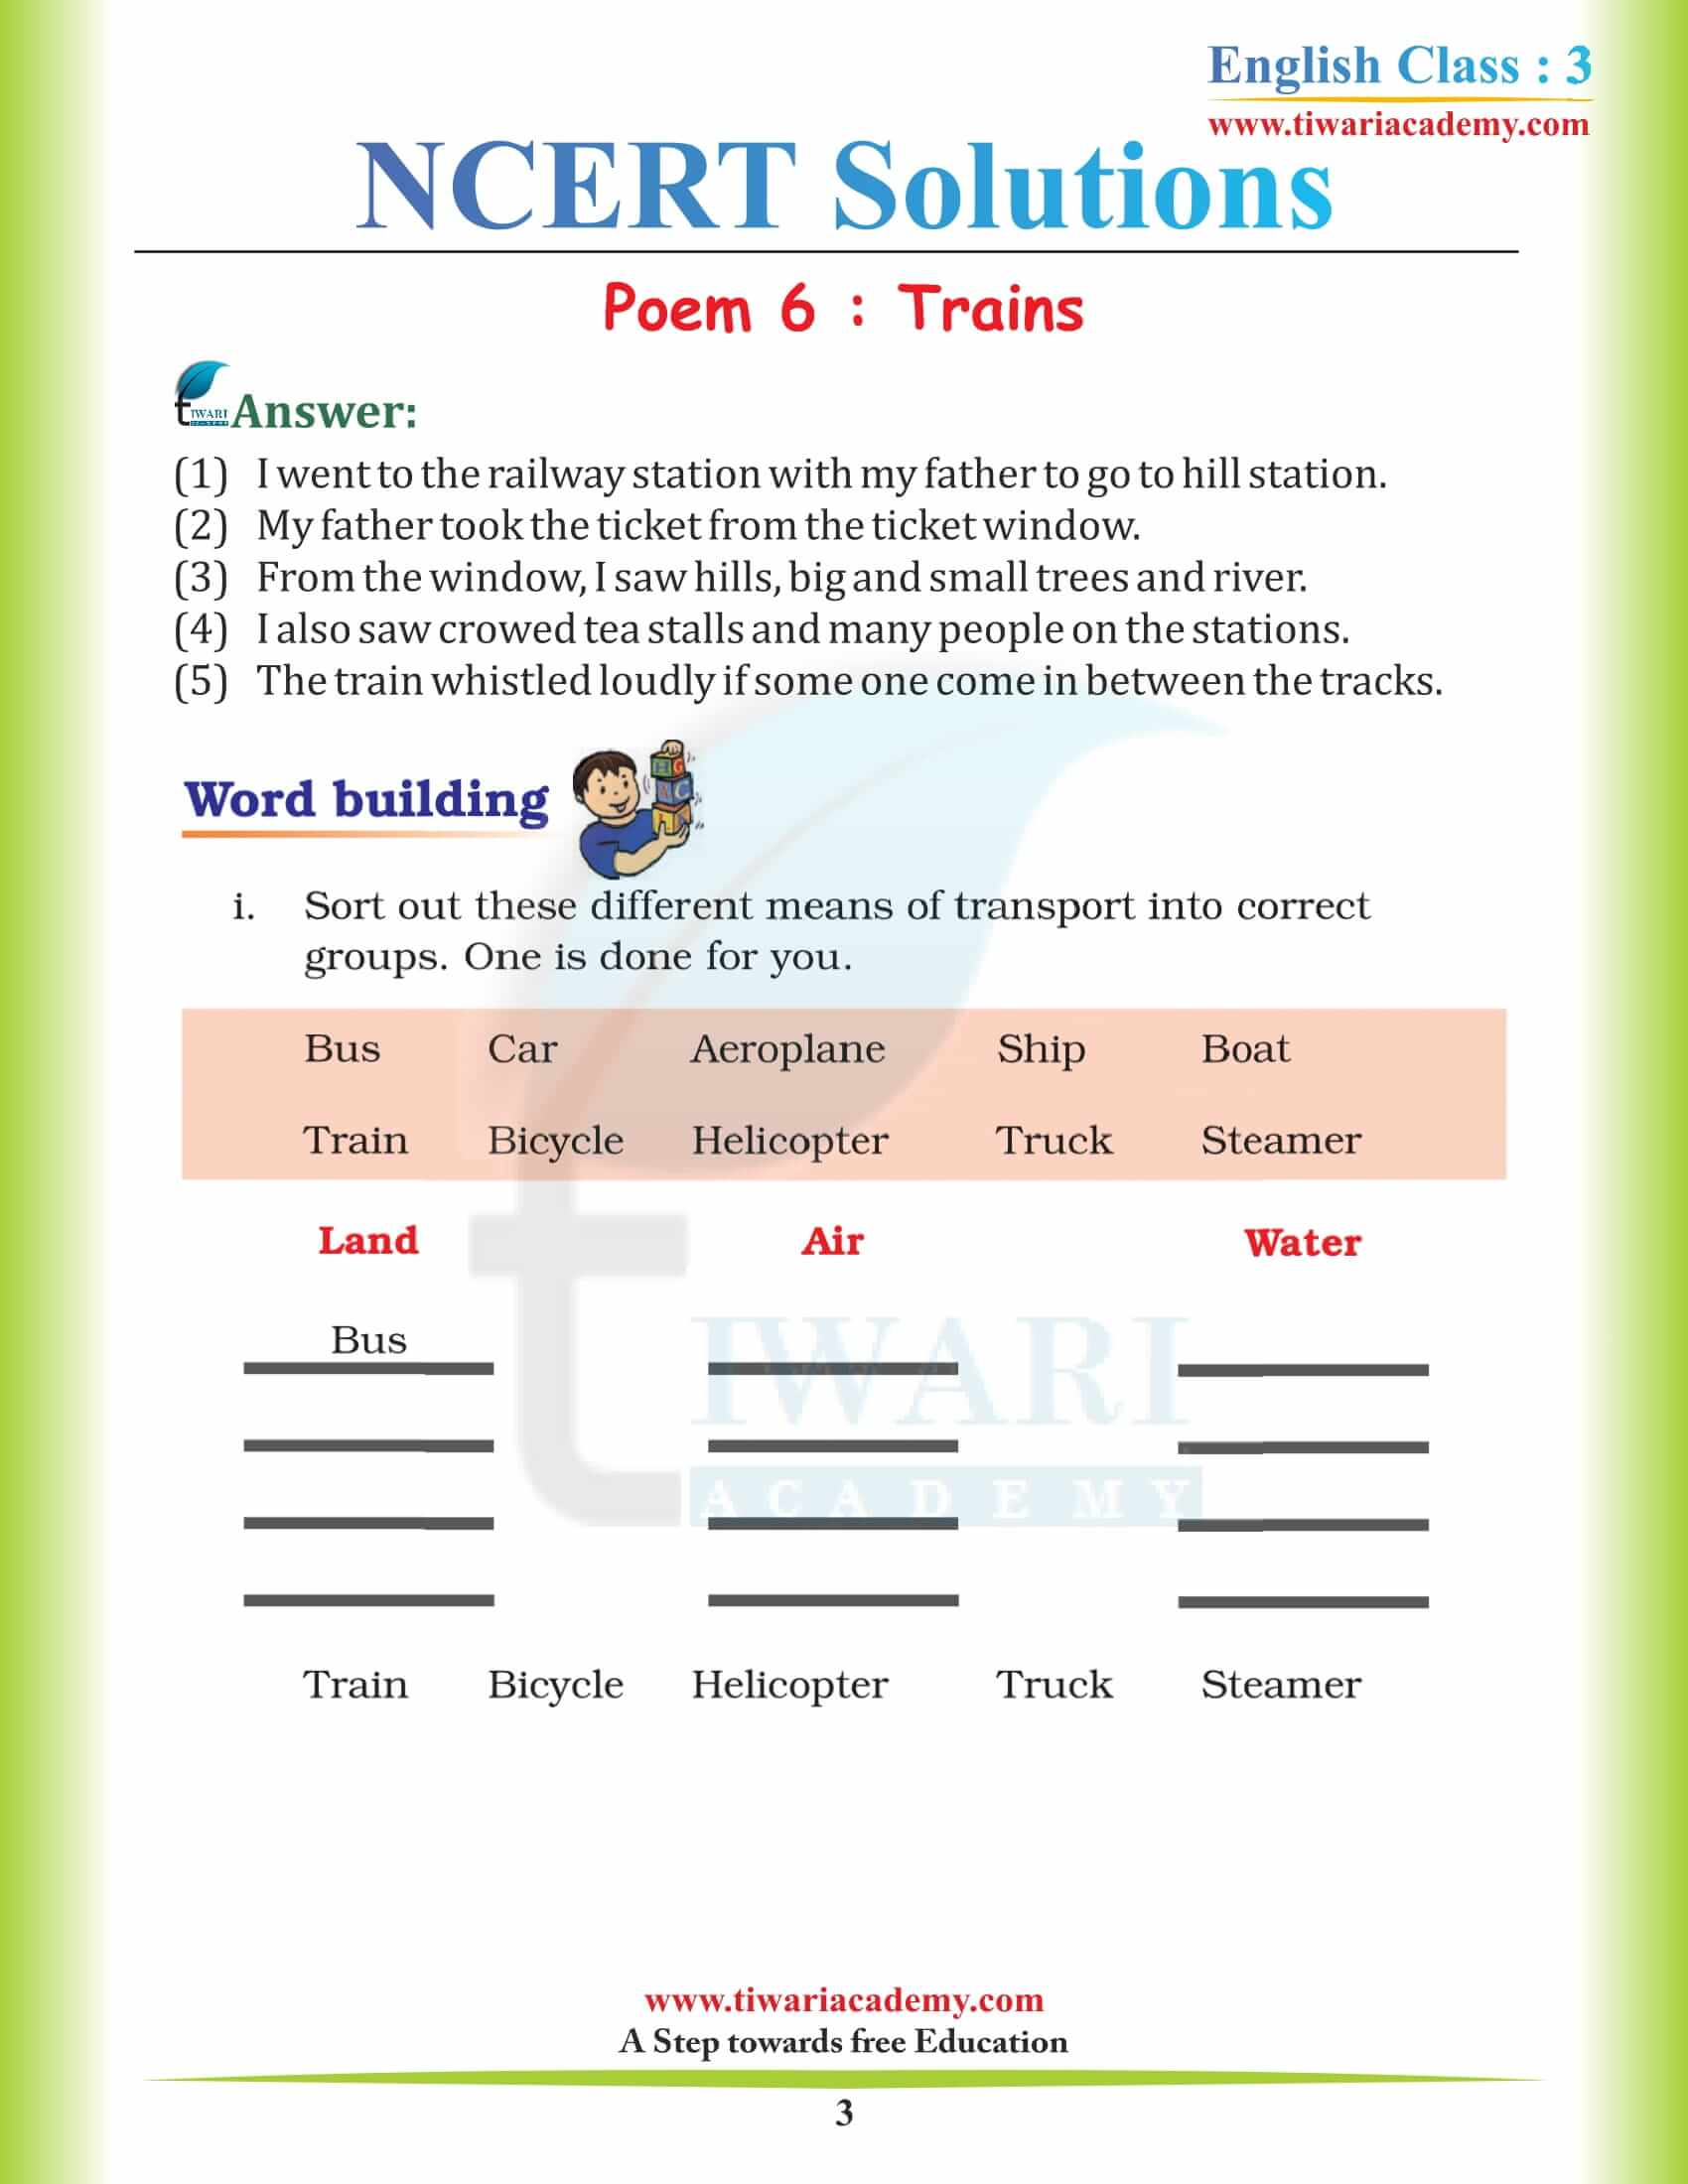 NCERT Solutions for Class 3 English Unit 6